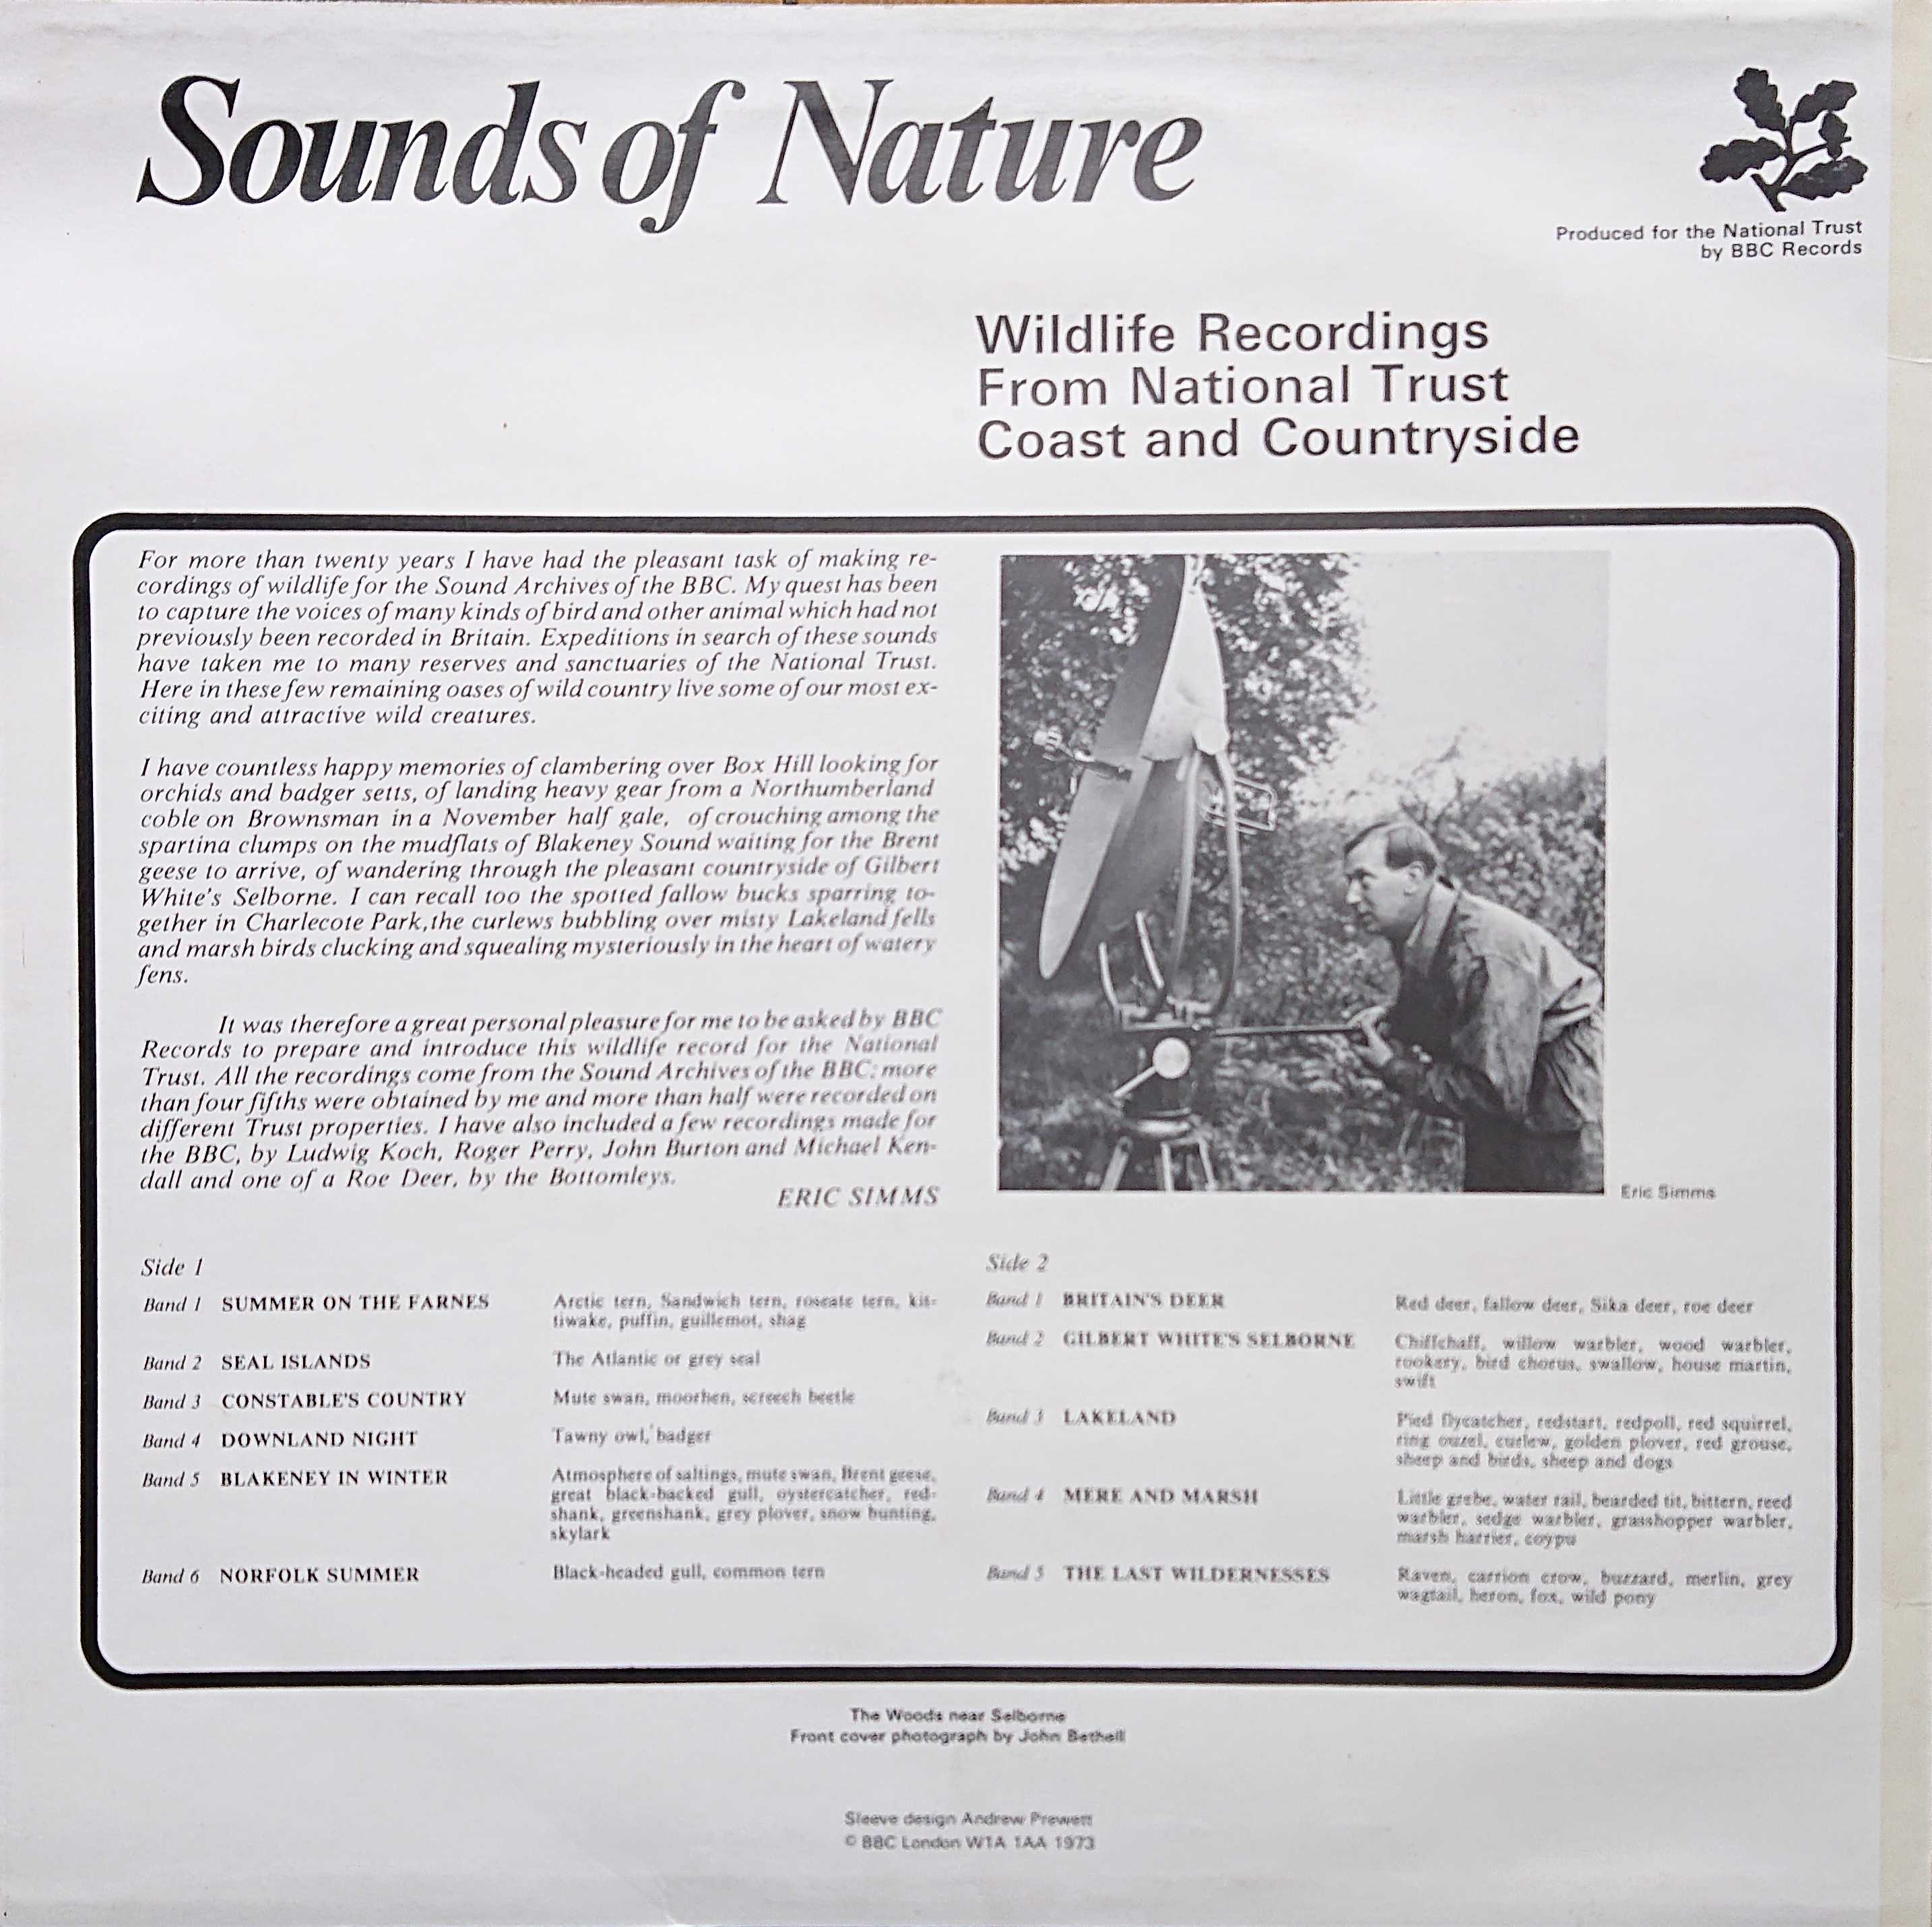 Picture of NT 001 Sounds of nature by artist Eric Simms from the BBC records and Tapes library